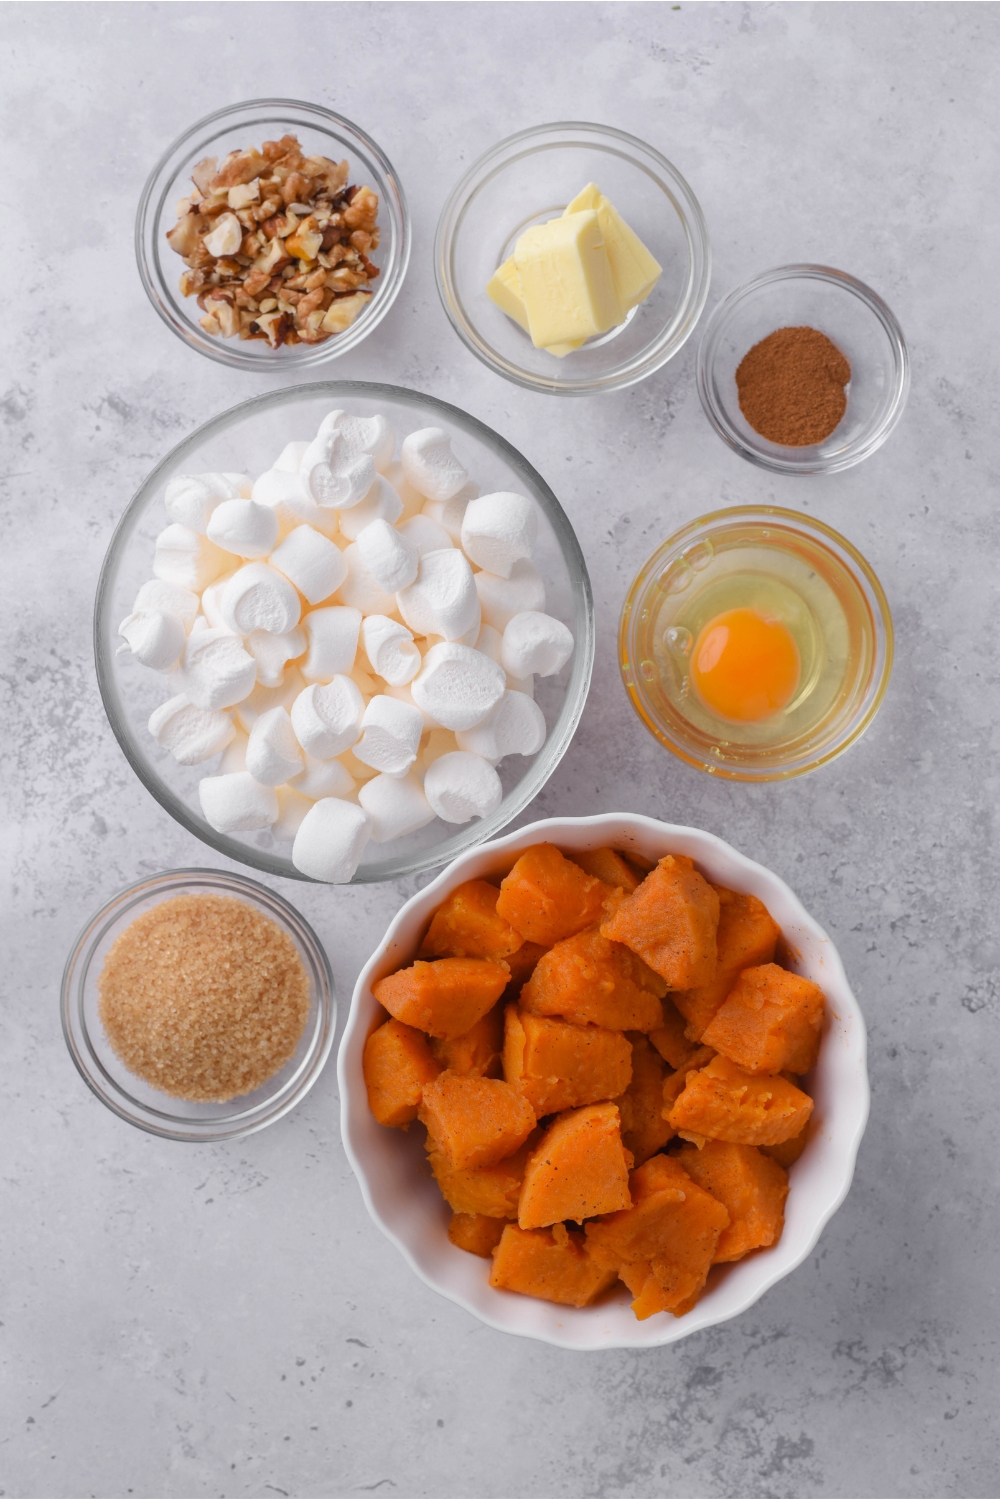 Overhead view of an assortment of ingredients including bowls of canned yams, marshmallows, an egg, brown sugar, butter, chopped nuts, and cinnamon.